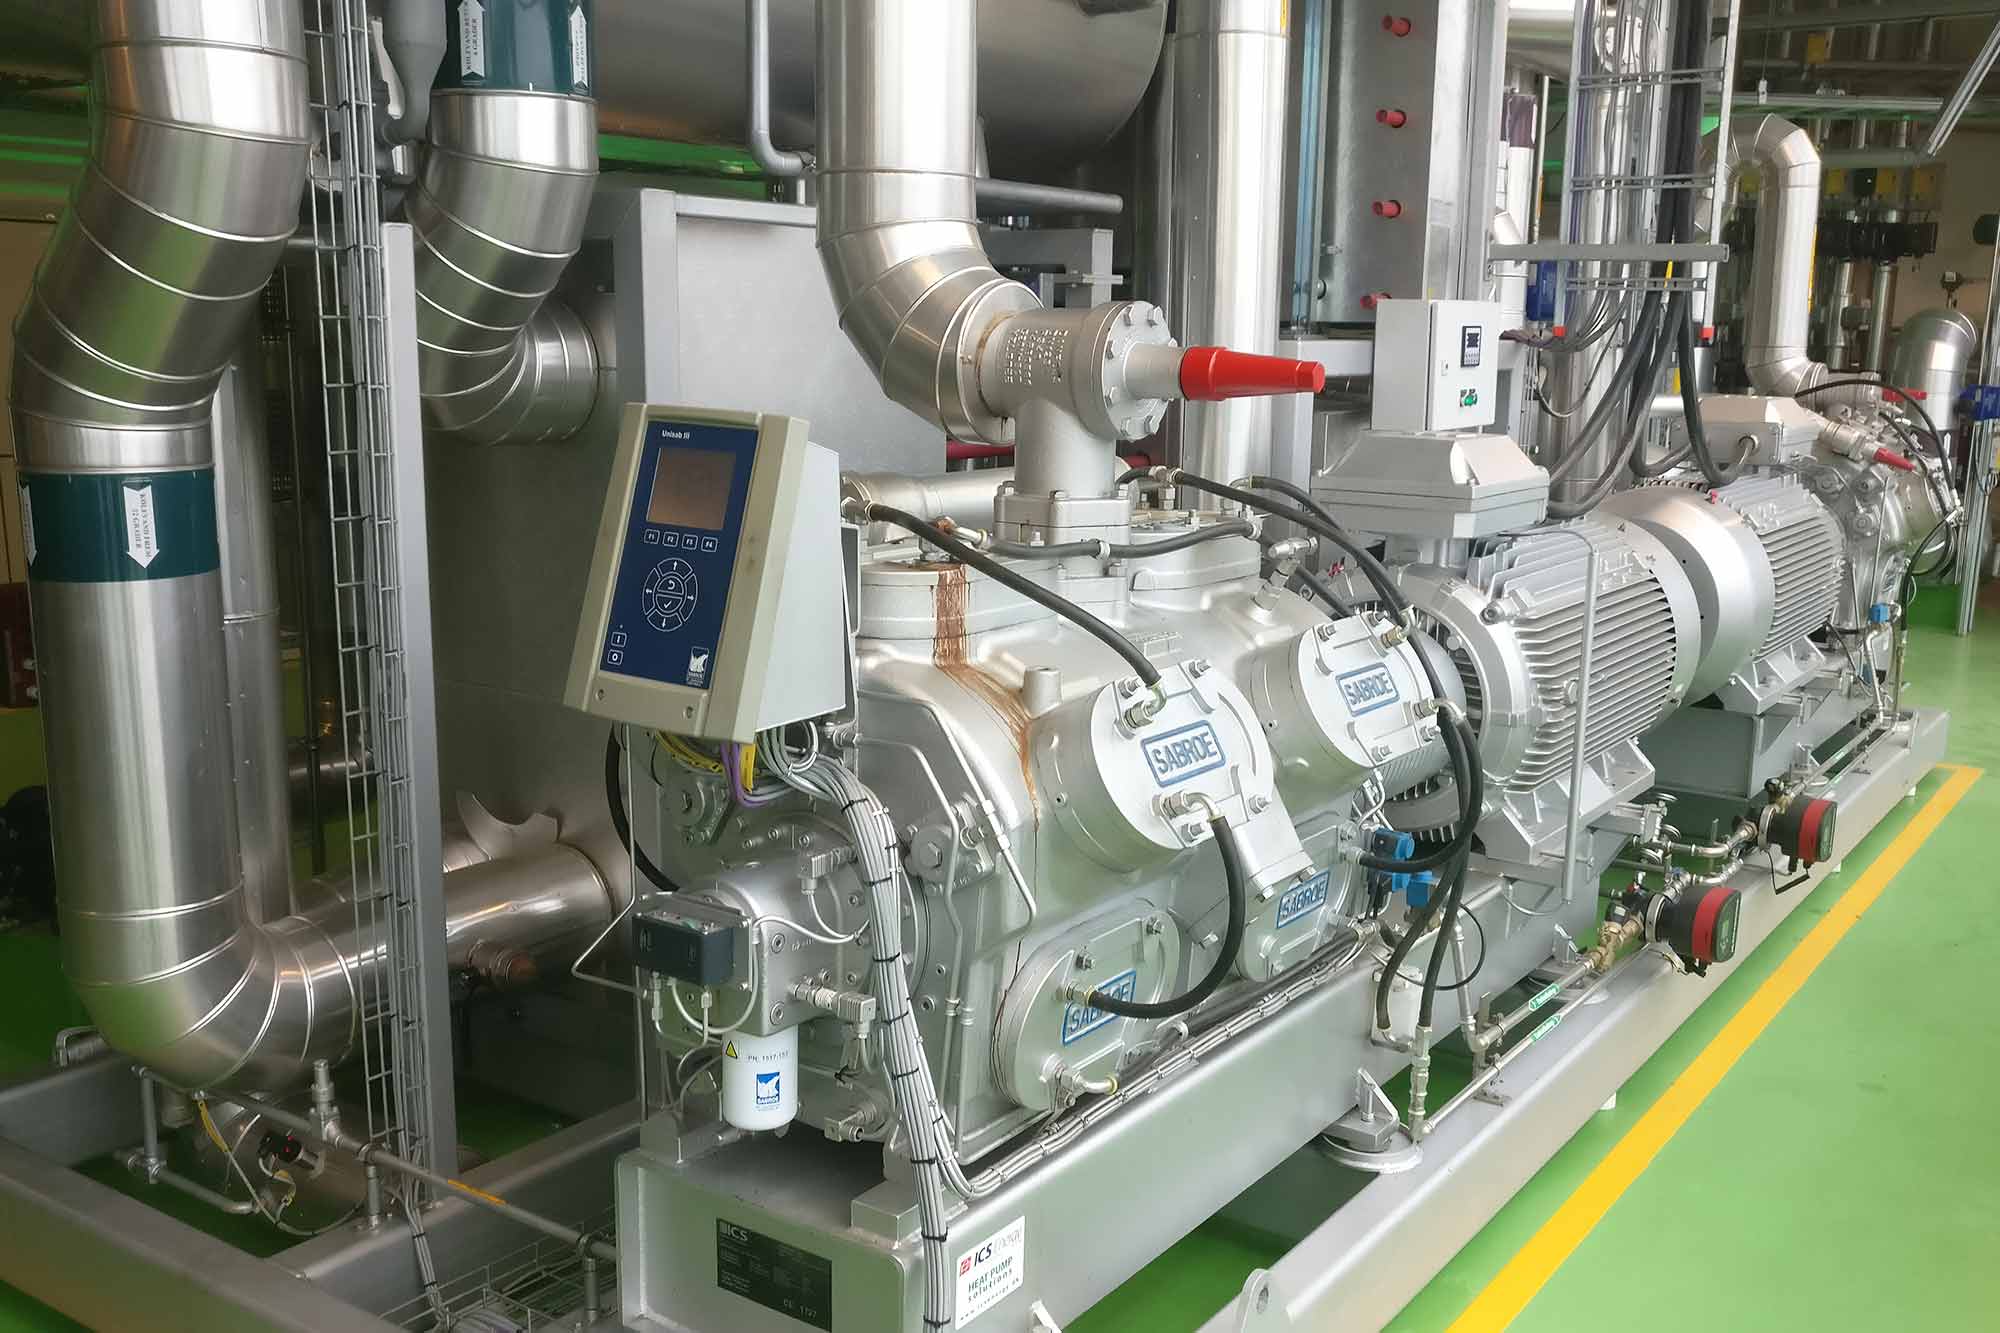 Heat pump for feeding waste heat into district heating networks, photo: 4ward Energy Research GmbH